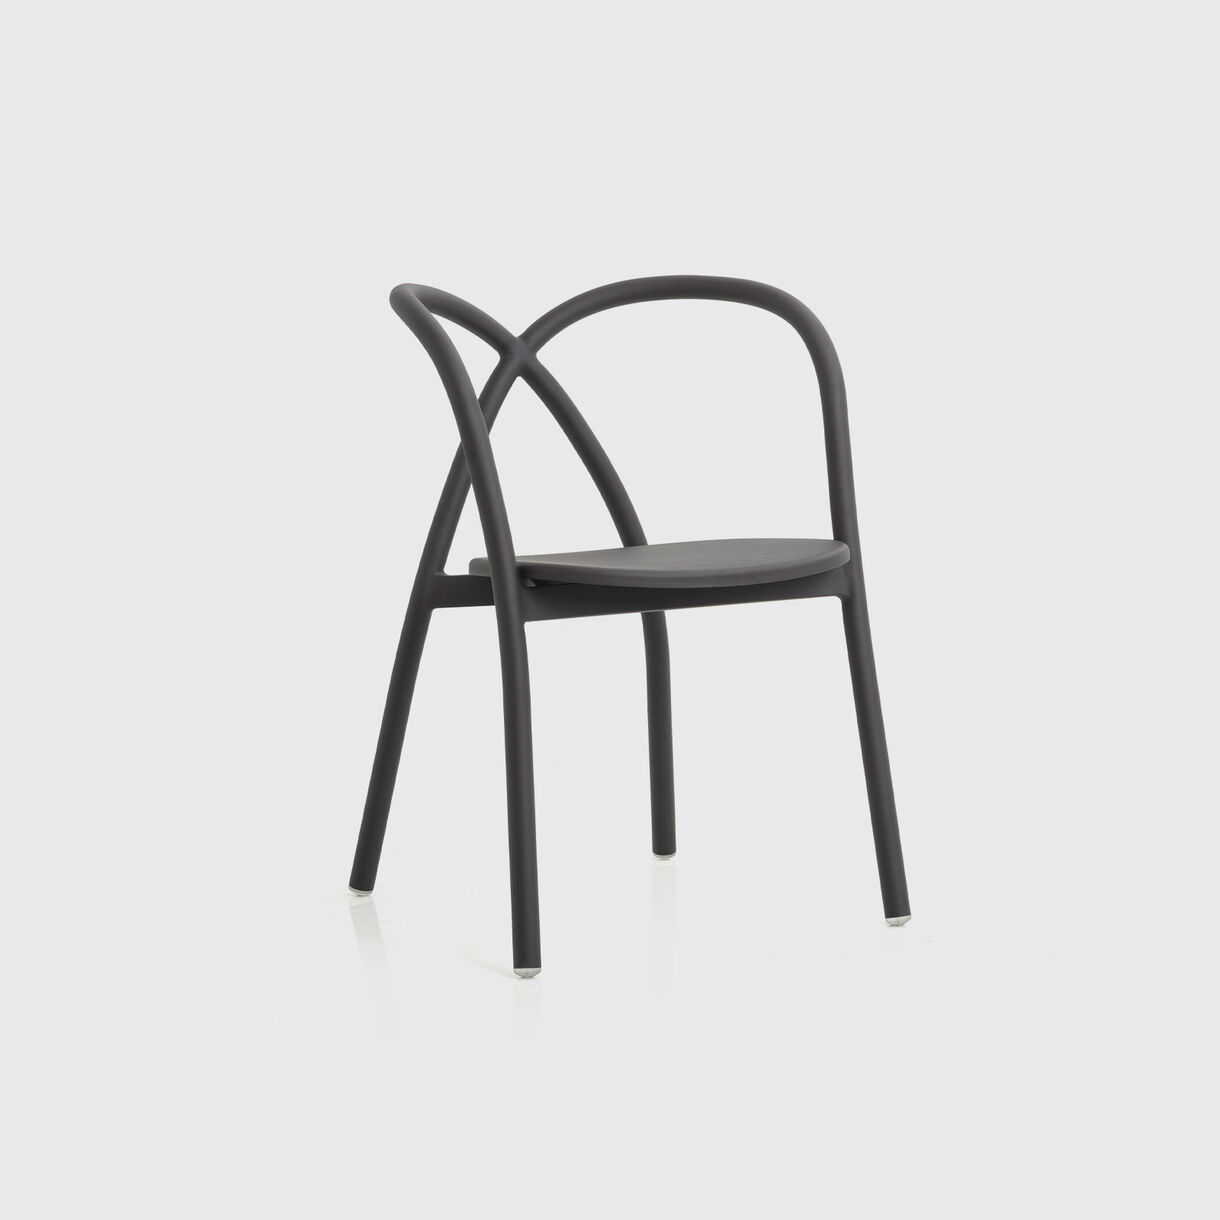 Ming Outdoor Chair, Black